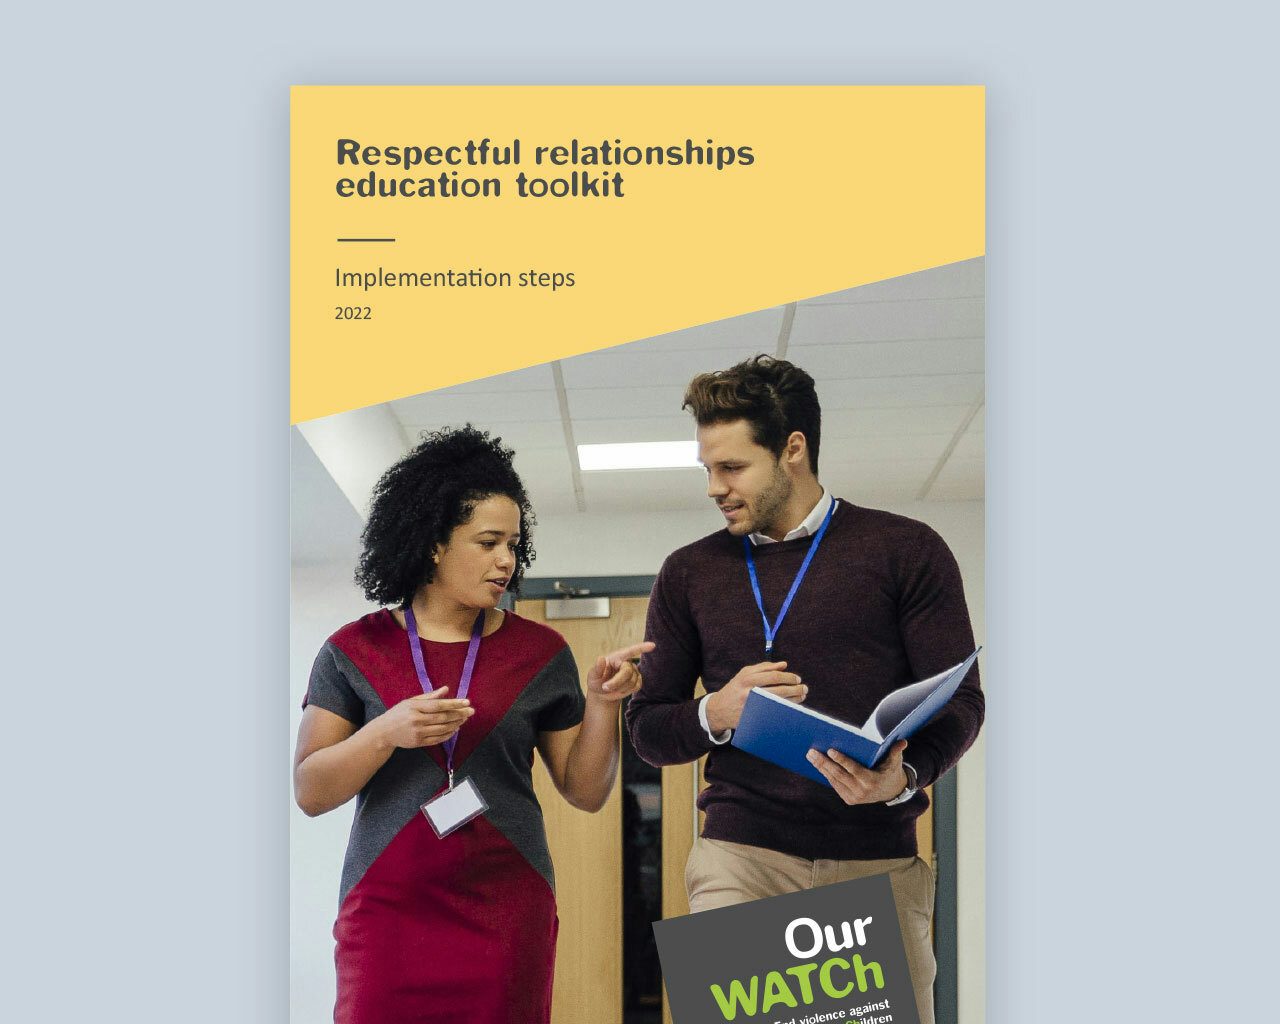 Cover of resource showing image of a woman and man teacher walking in a corridor discussing something. The man is holding an open folder.